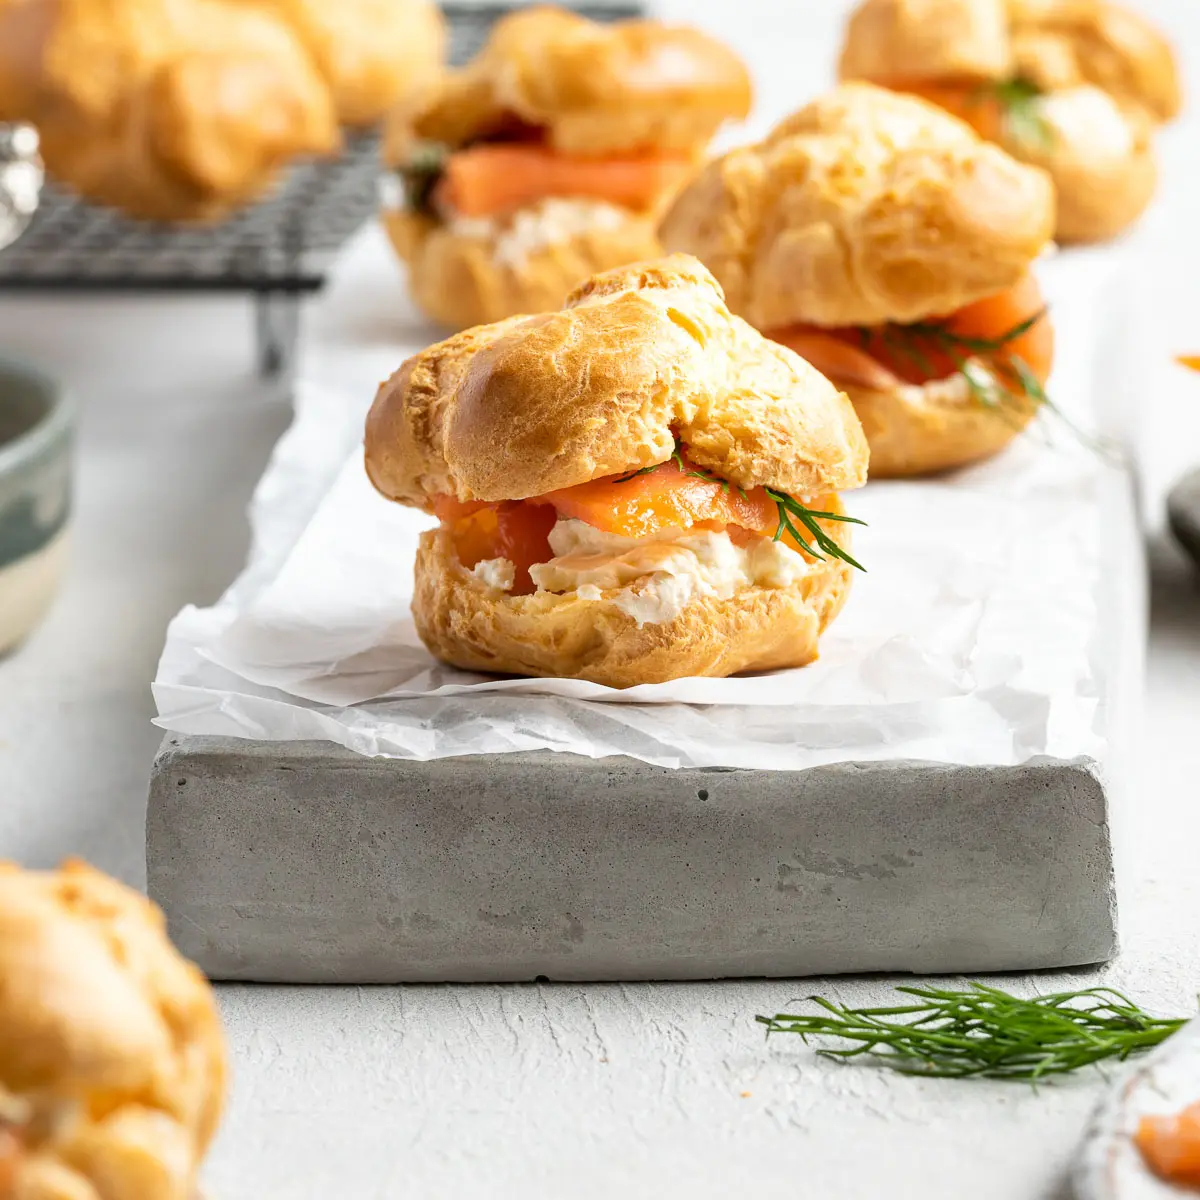 profiteroles with smoked salmon - How to make savory choux pastry